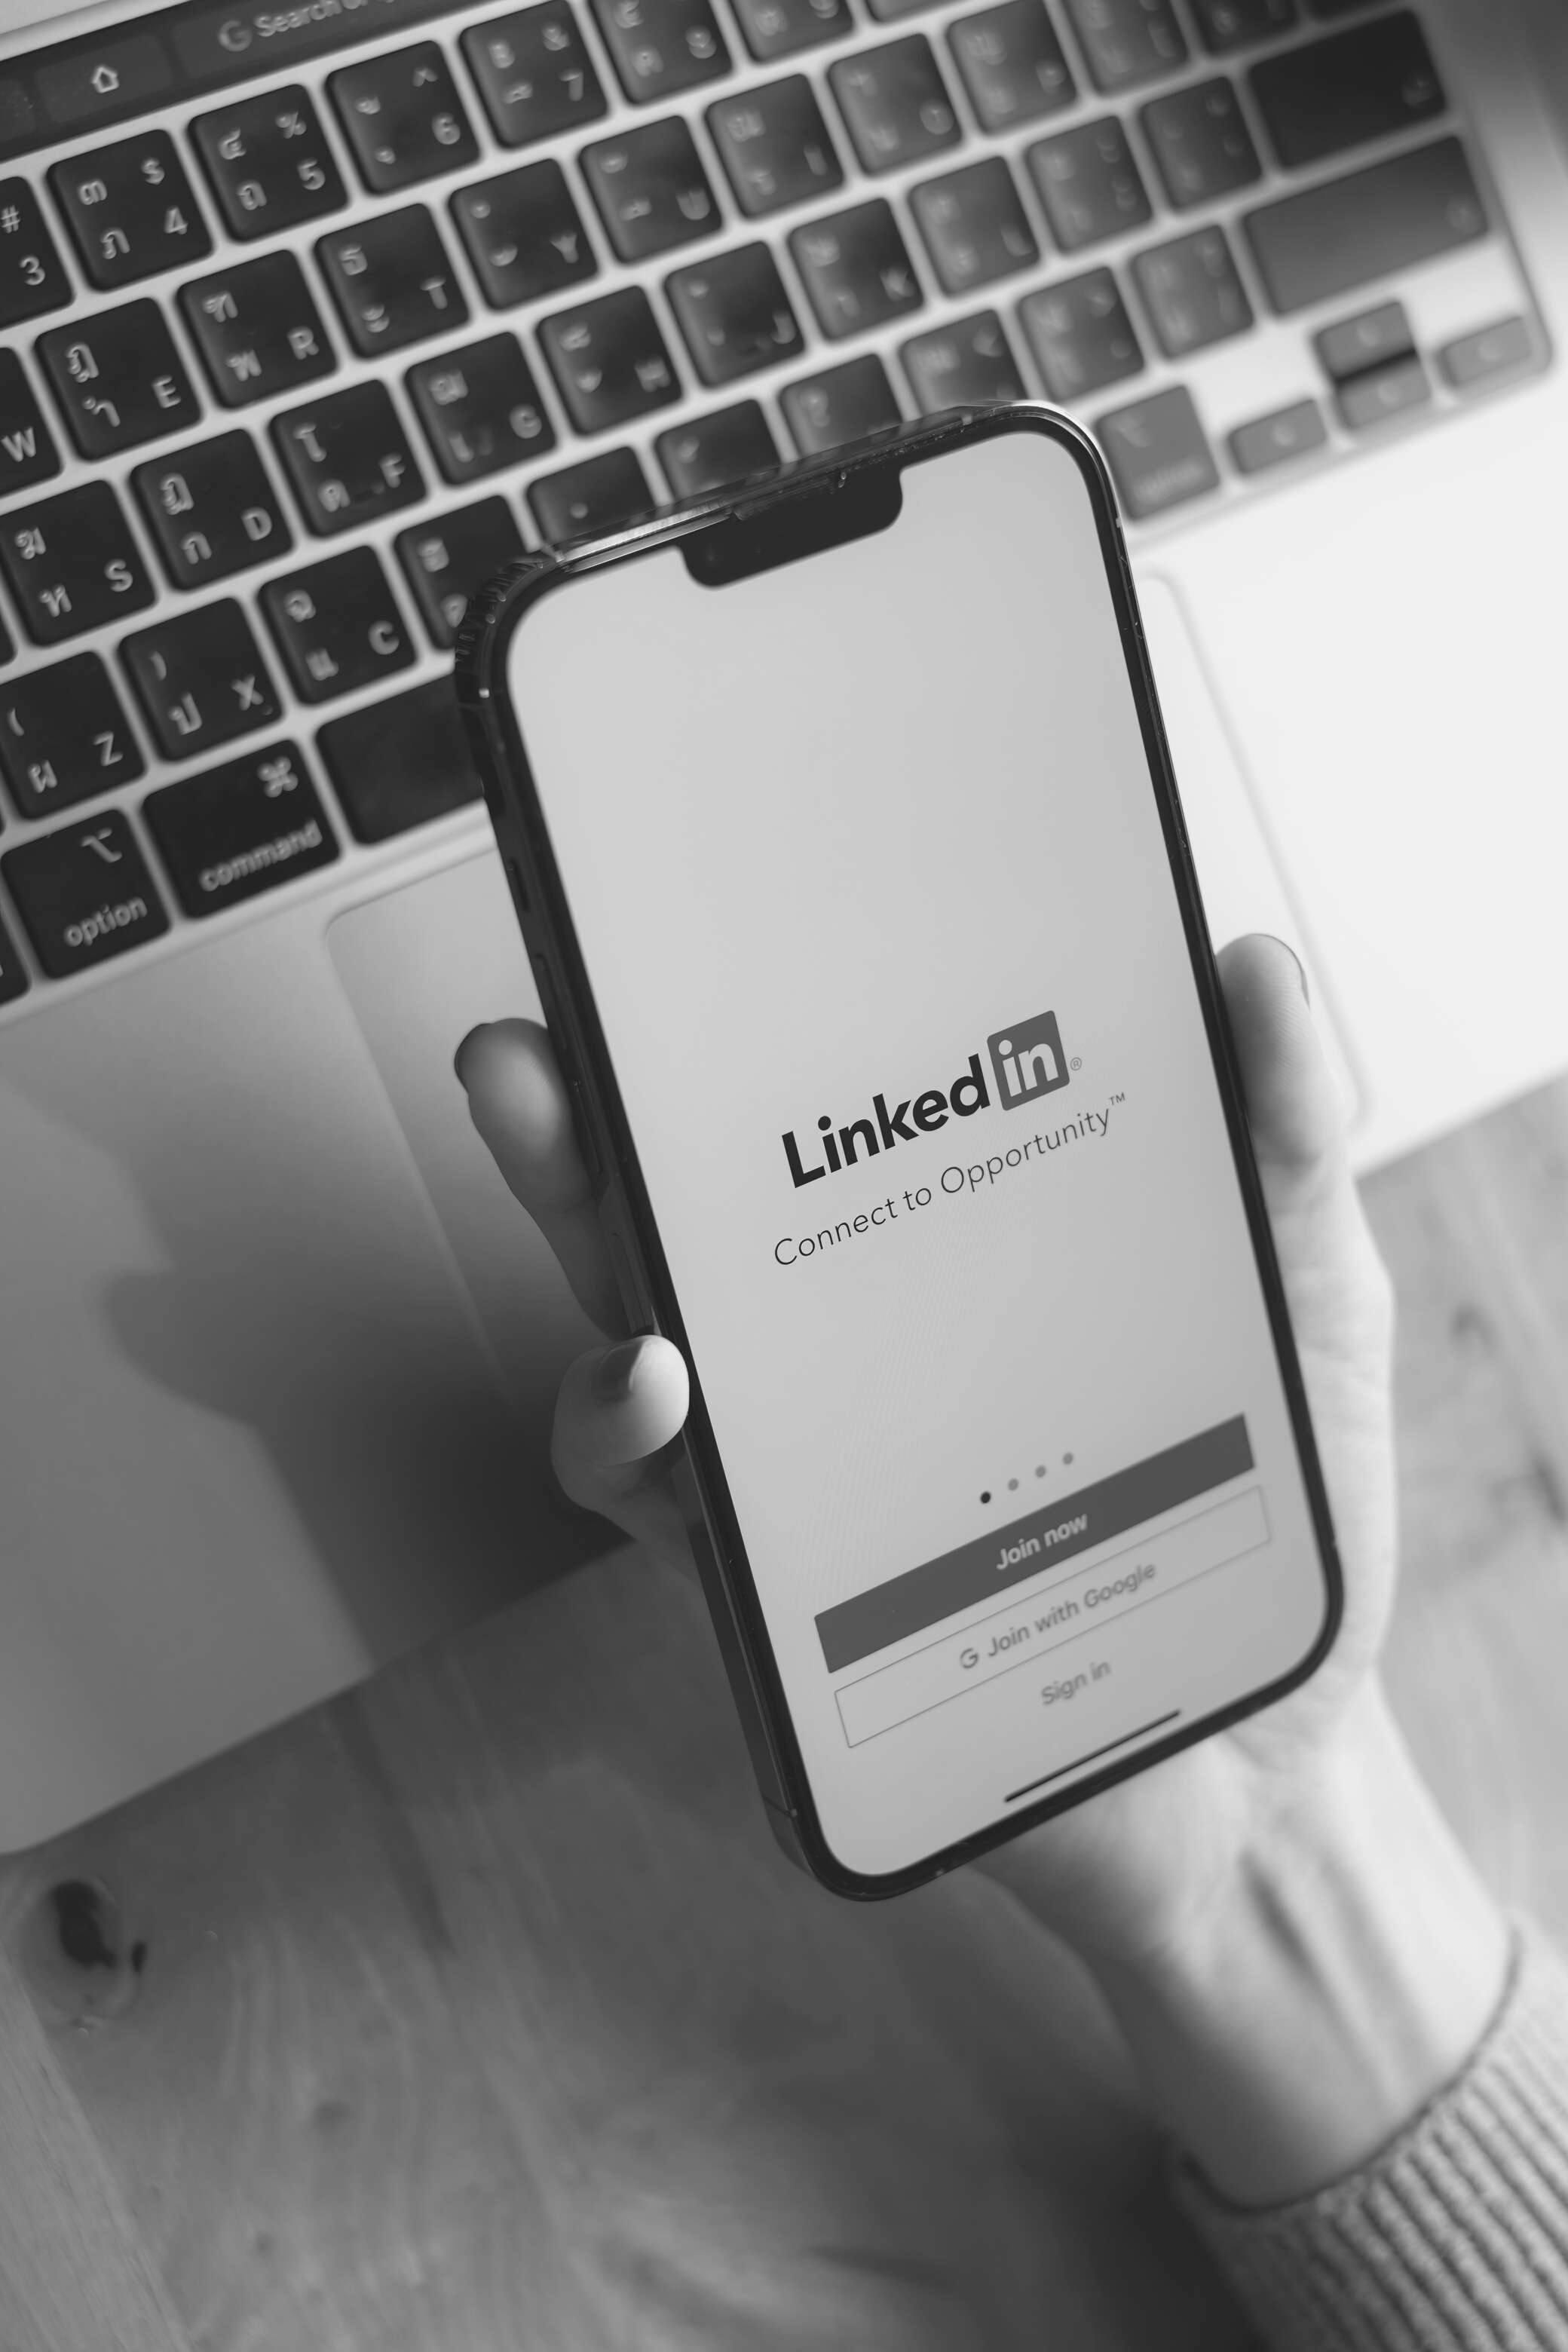 CHIANG MAI, THAILAND: OCT 18, 2021: LinkedIn Logo on Phone Screen. LinkedIn Is a Social Network for Search and Establishment of Business Contacts. It Is Founded in 2002.